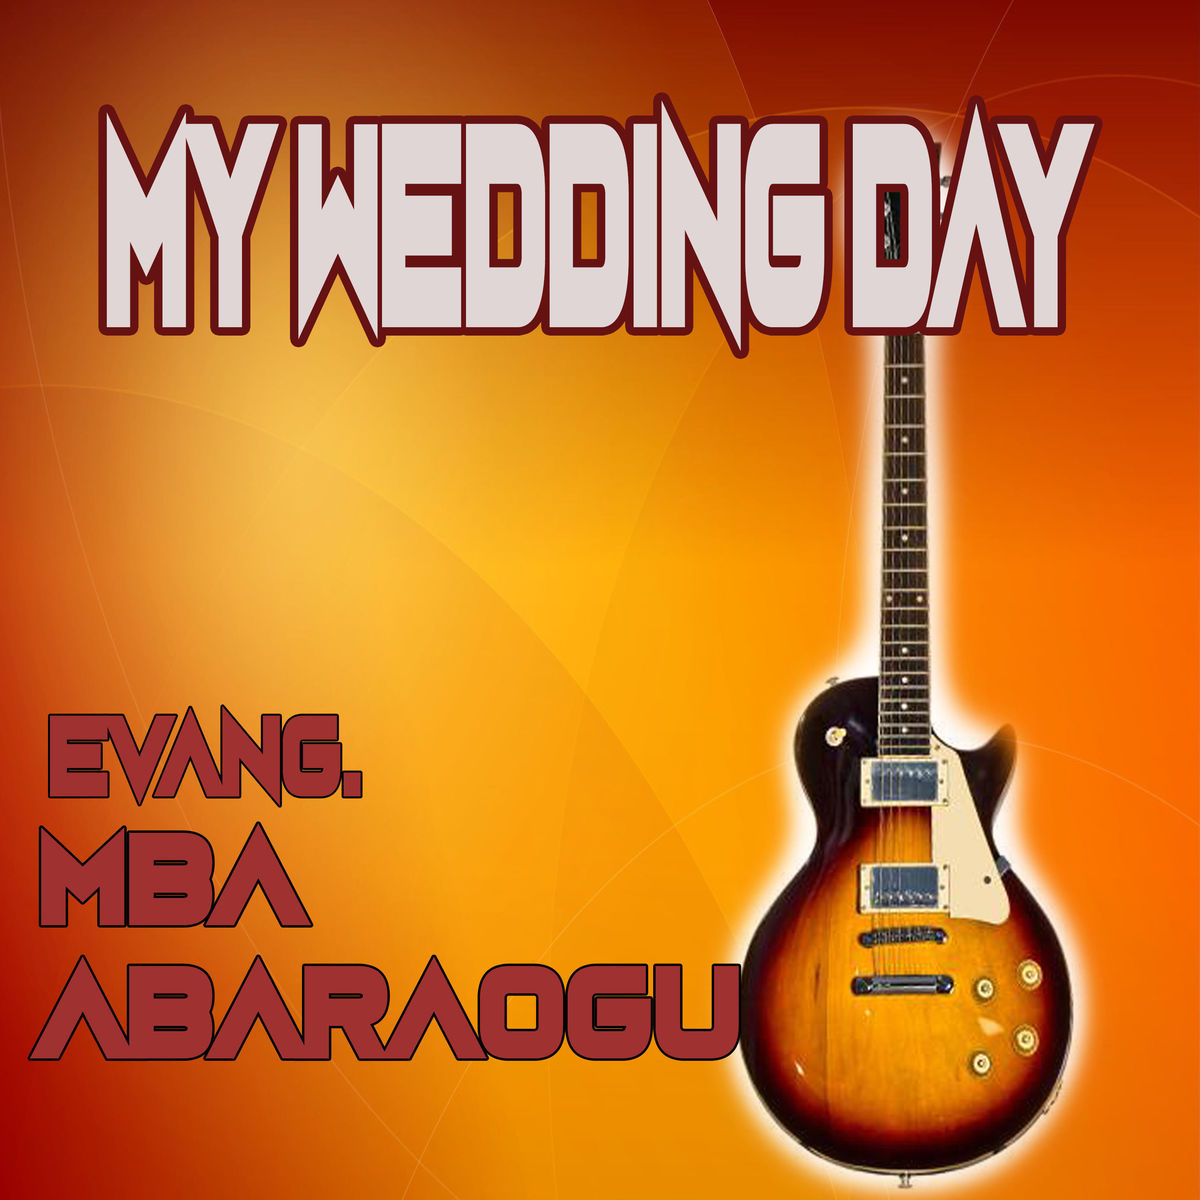 Evang. Mba Abaraogu - When This Wedding Shall Be Over mp3 download